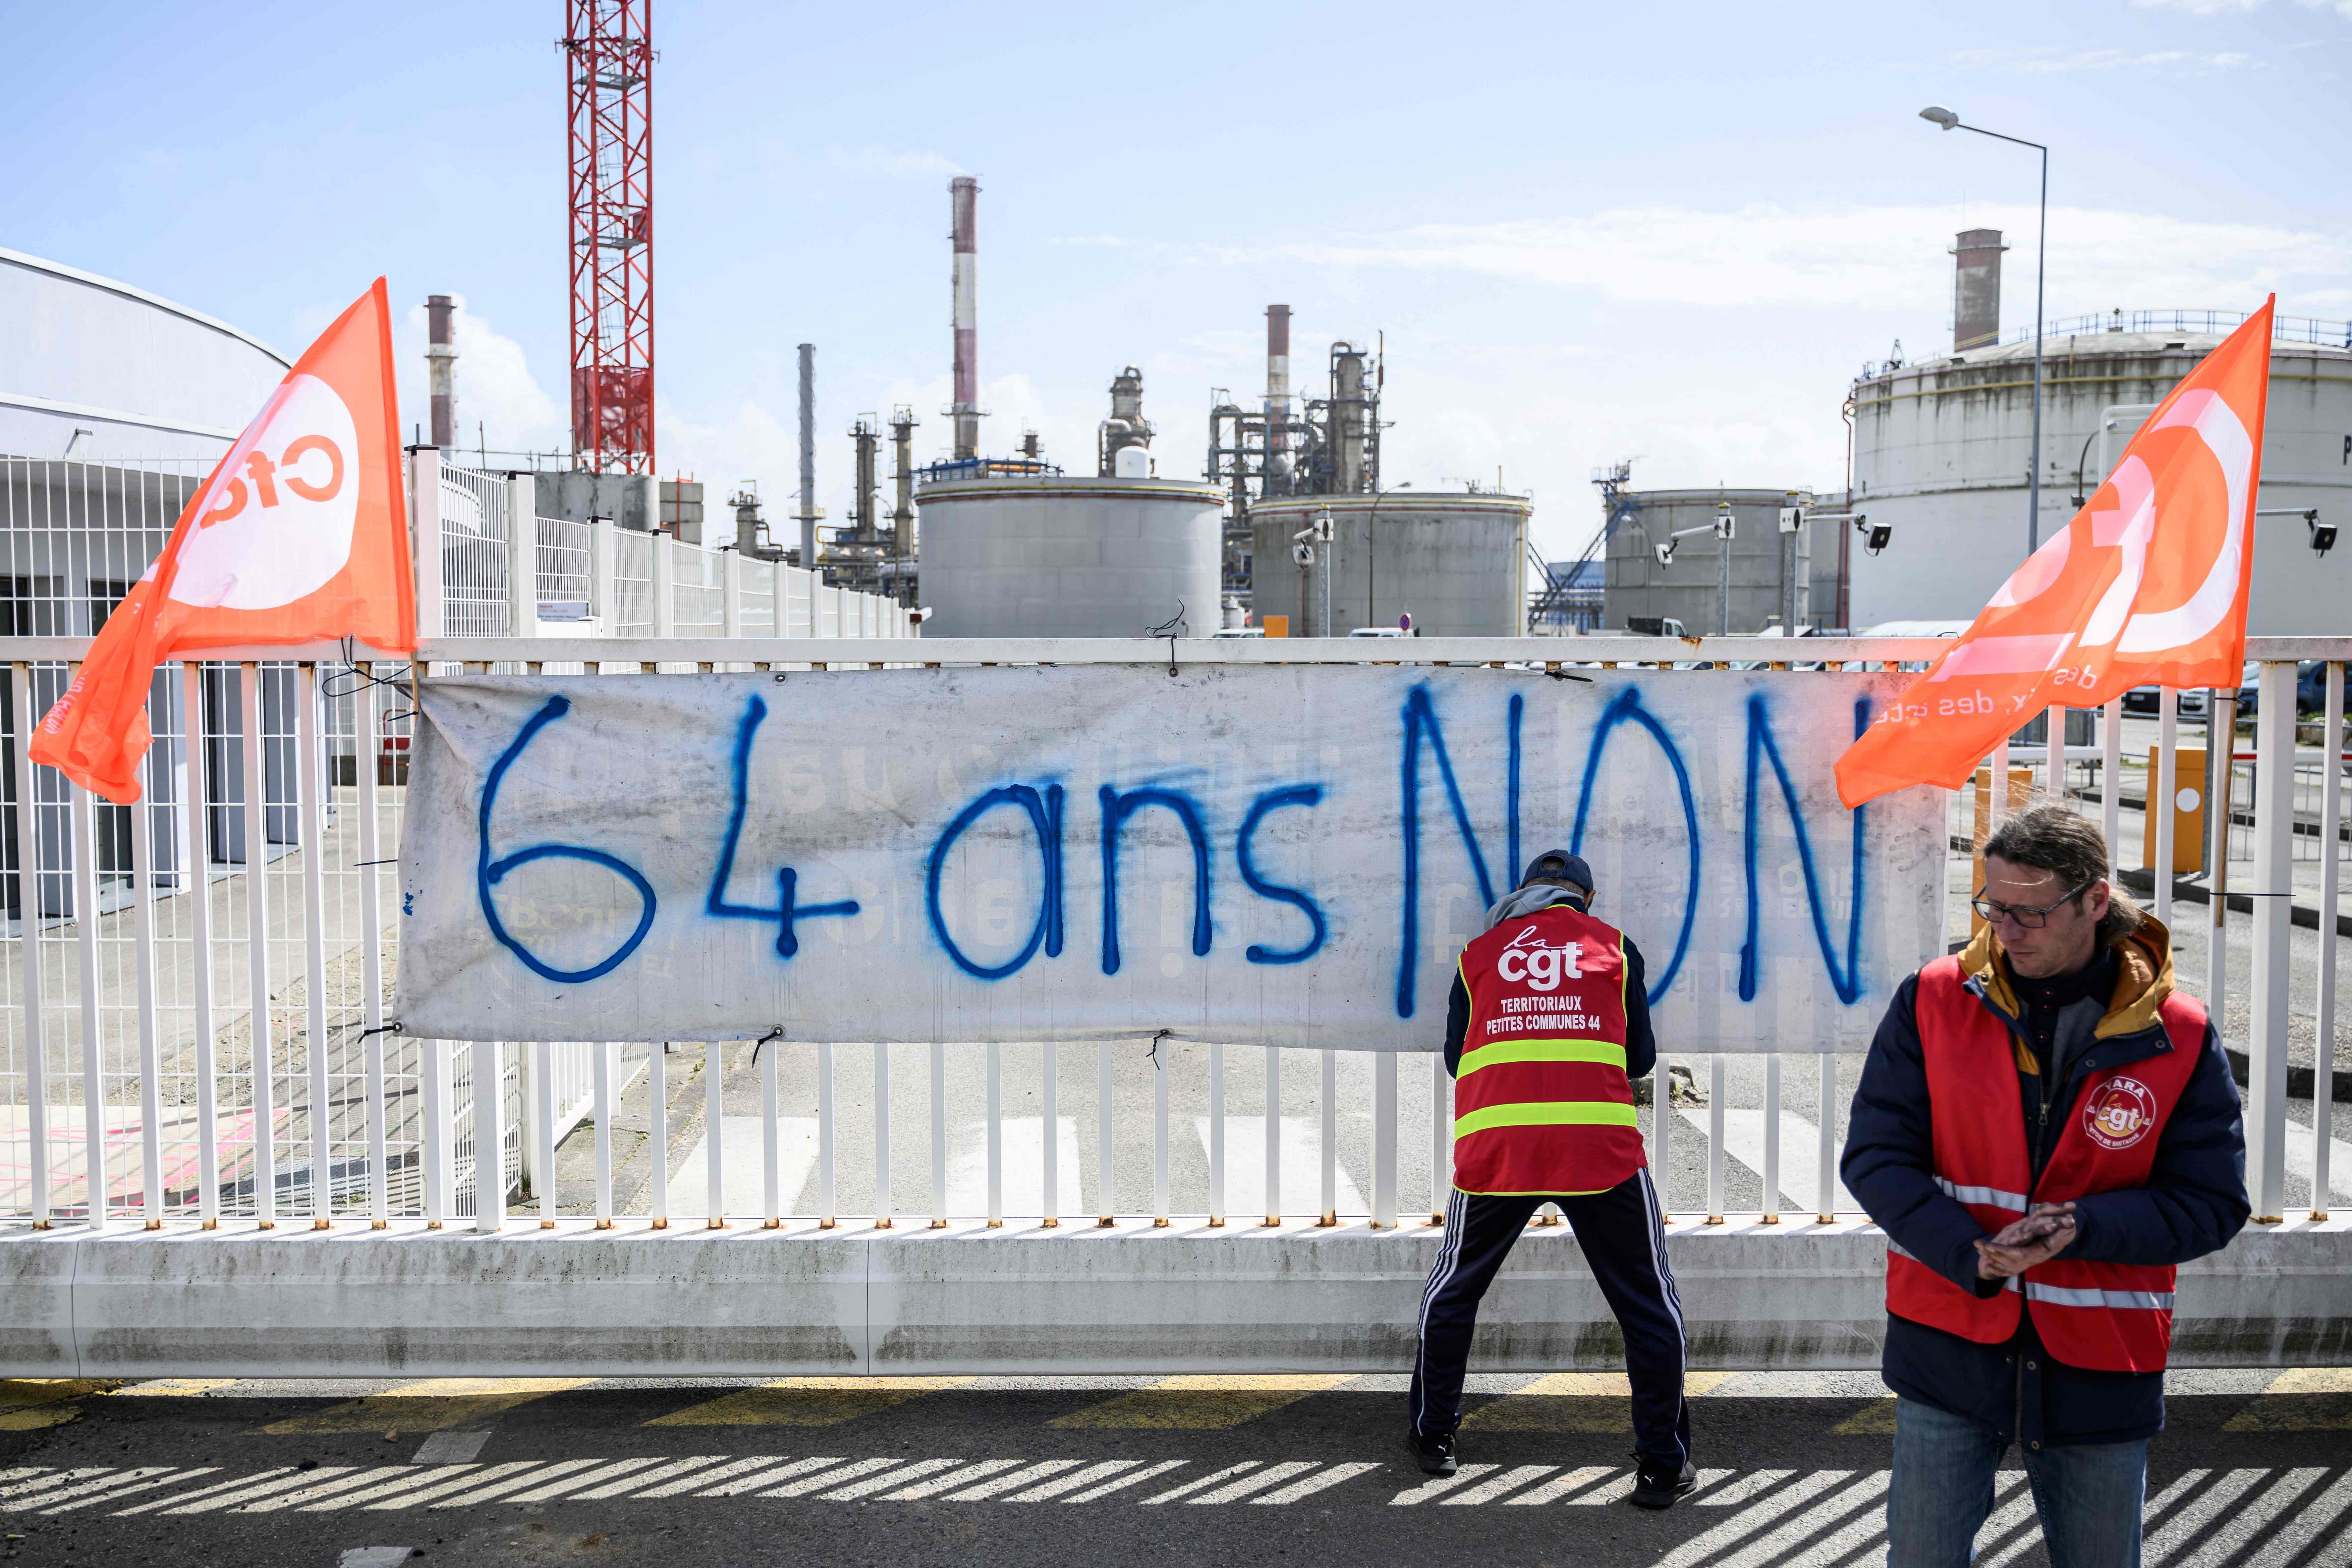 TotalEnergie workers and union members attach a banner reading "64-years-old, No" as they block the entrance of the Donges refinery